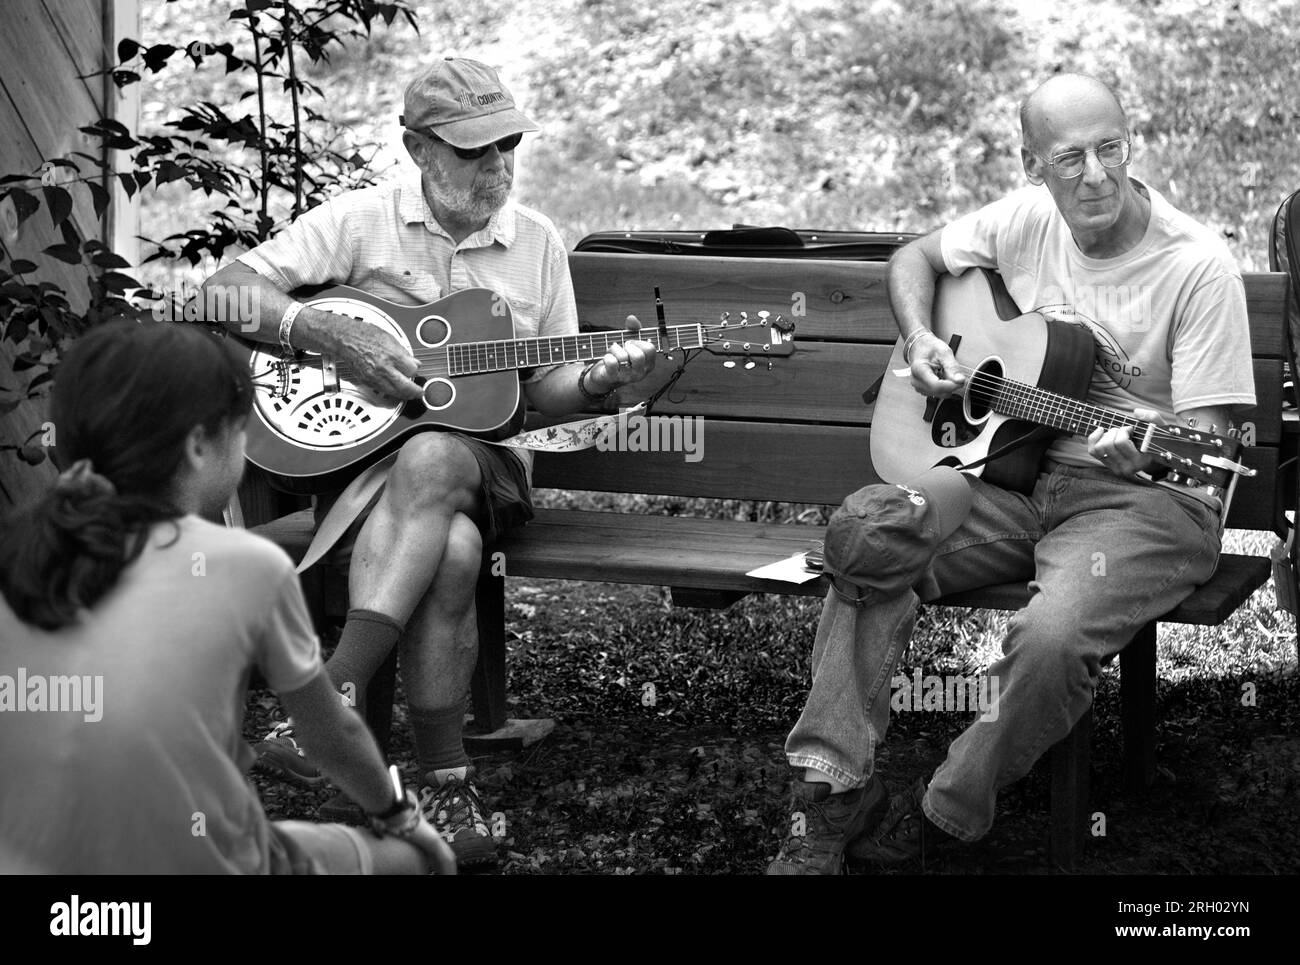 Musicians relax before performing at the Carter Fold, a country music and bluegrass music venue in Maces Spring in rural Southwest Virginia. Stock Photo